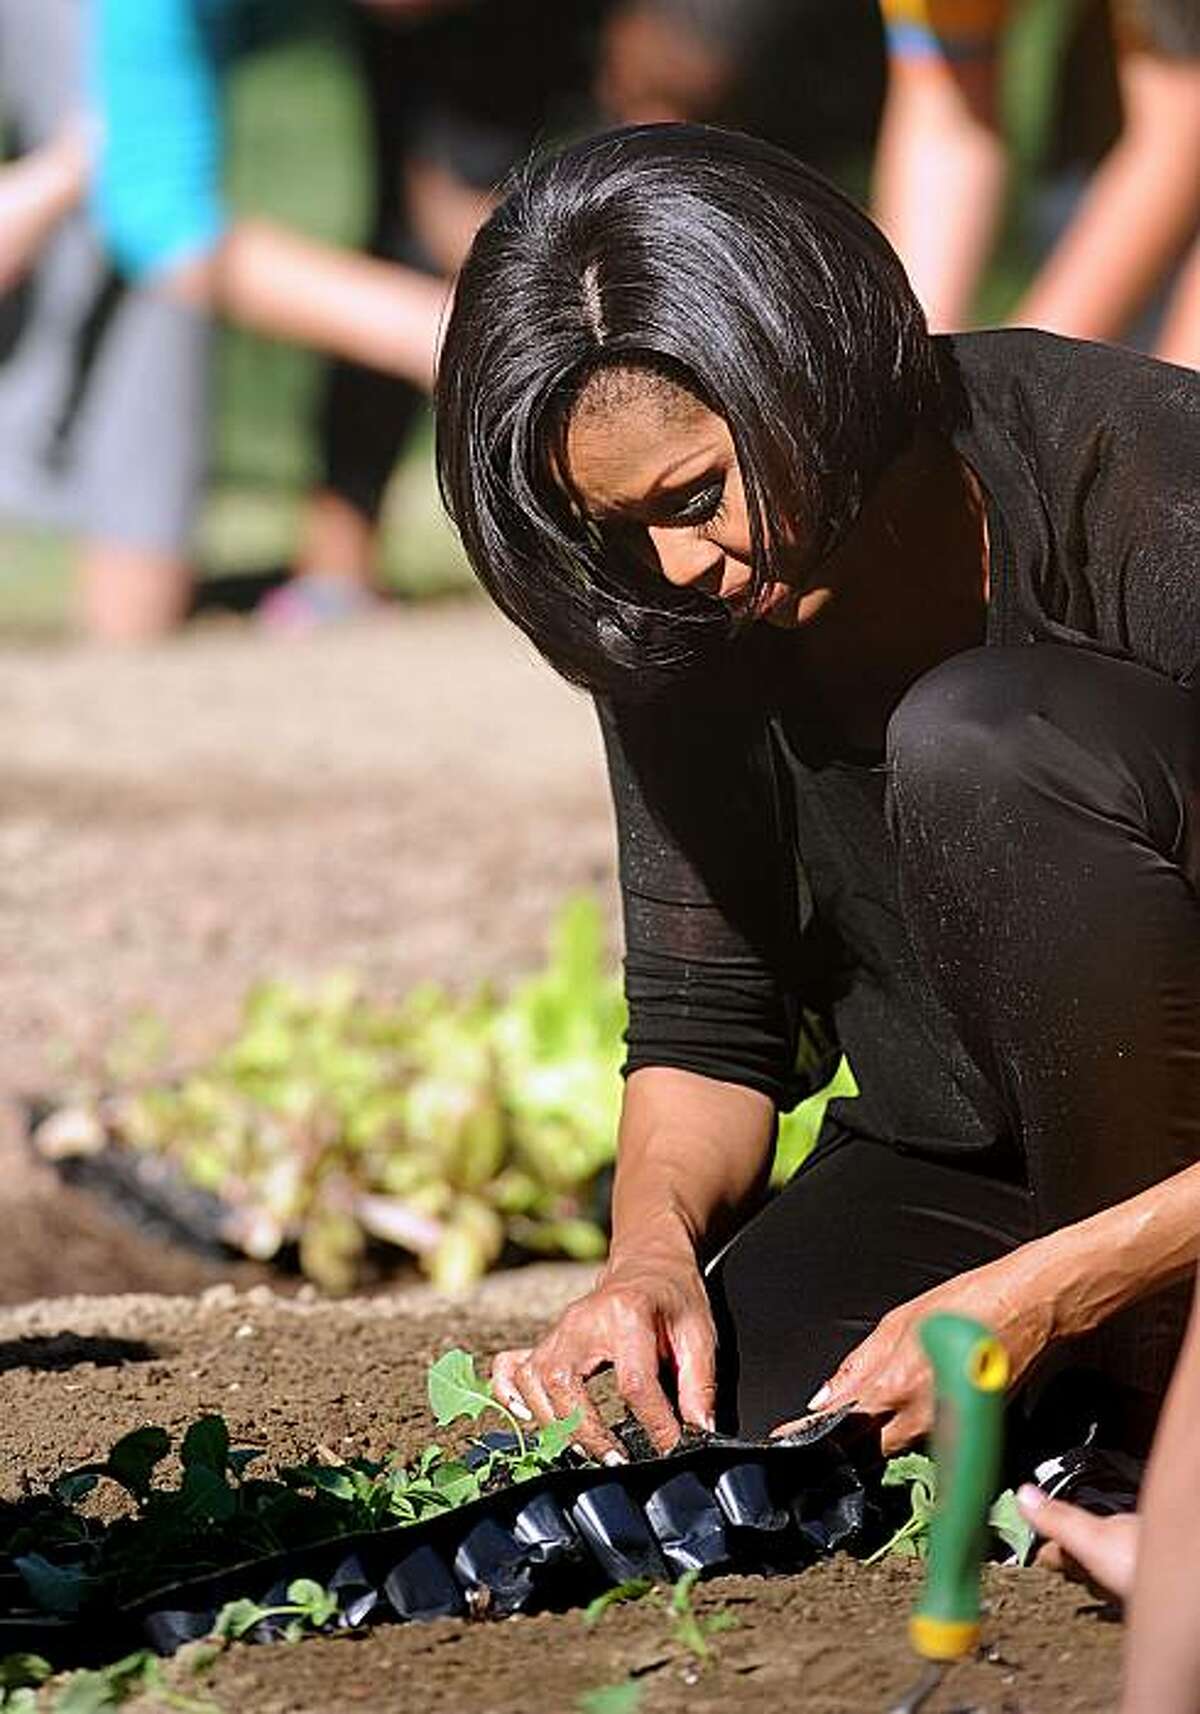 First lady Michelle Obama gets her hands dirty as she plays host to the Spring Garden Planting in the White House Kitchen Garden at the White House in Washington, D.C., on Wednesday, March 31, 2010. (Olivier Douliery/Abaca Press/MCT)